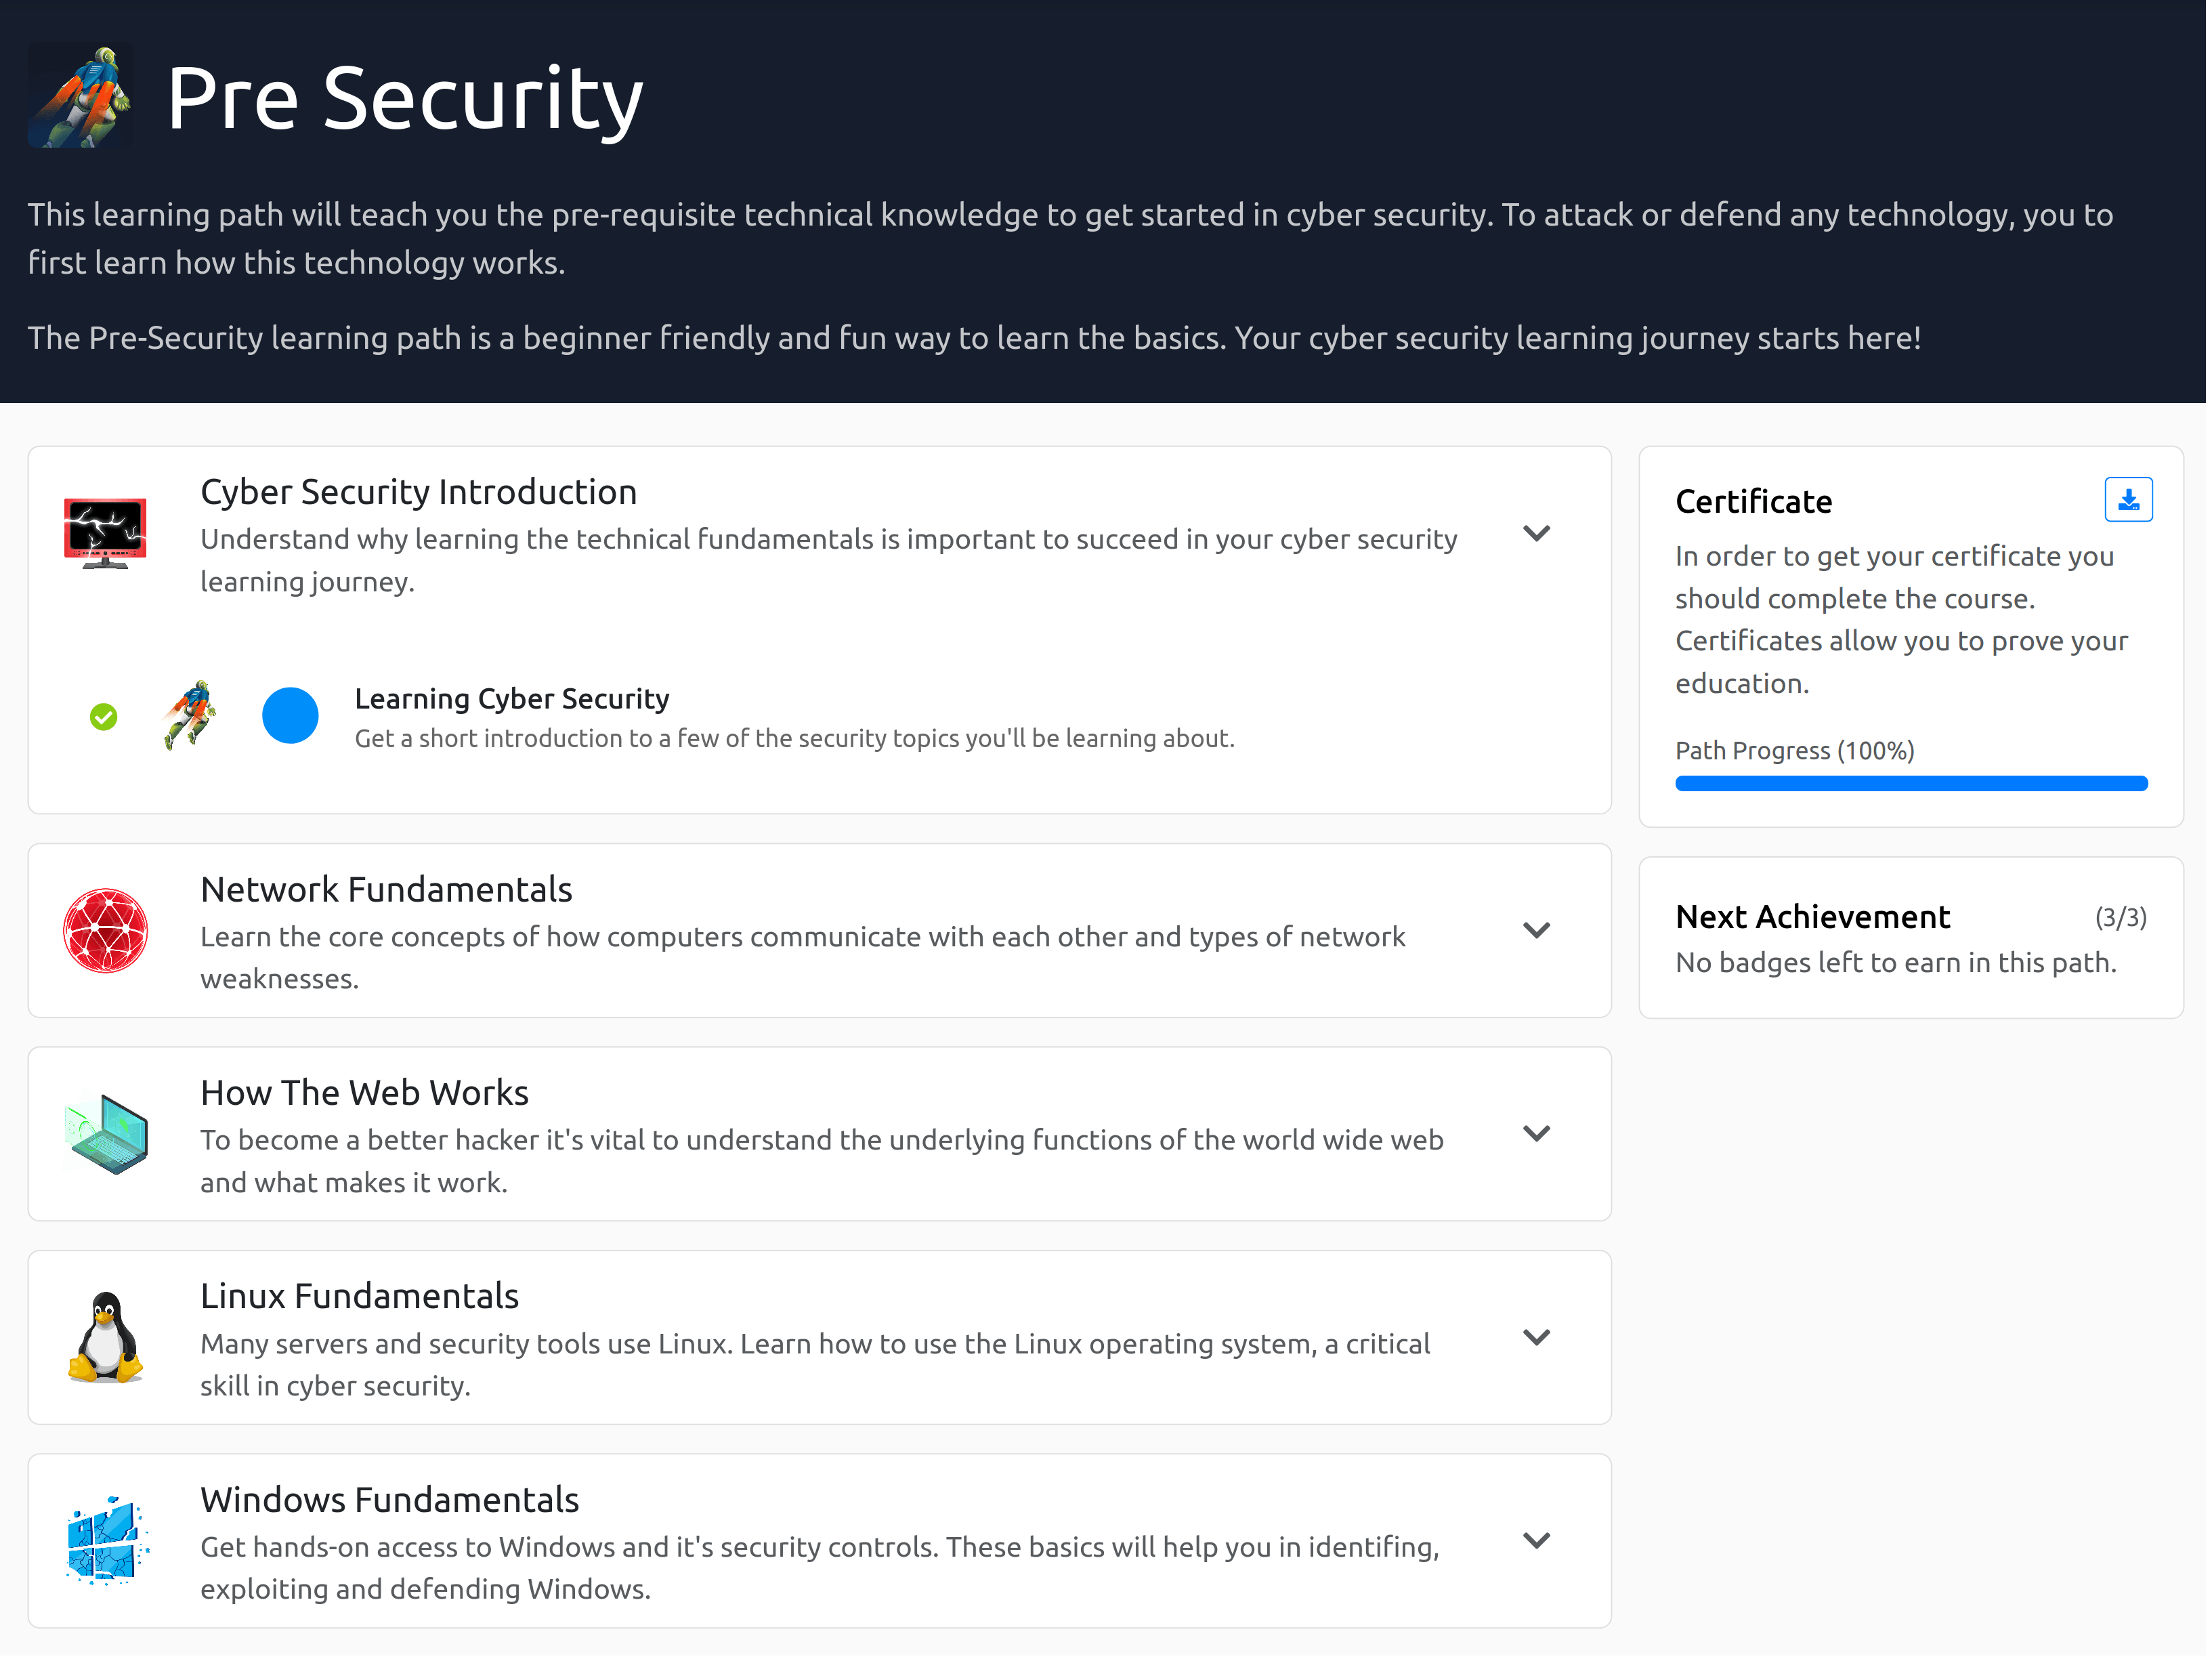 Inside the Pre Security Learning Path